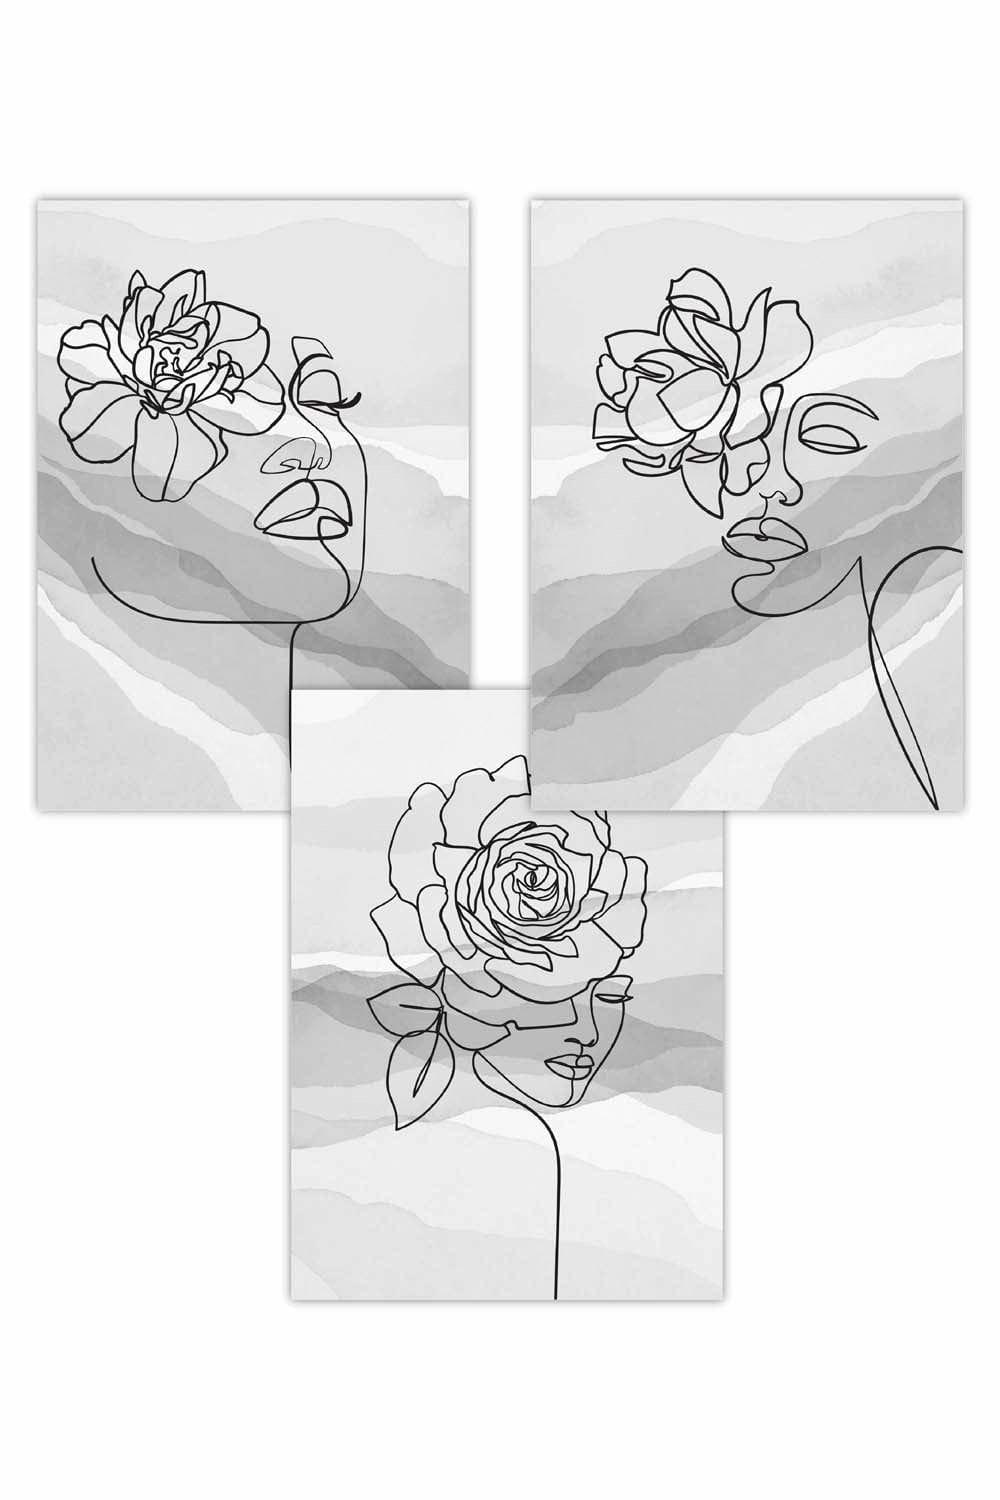 Set of 3 Female Line Art Floral Faces on Grey Art Posters